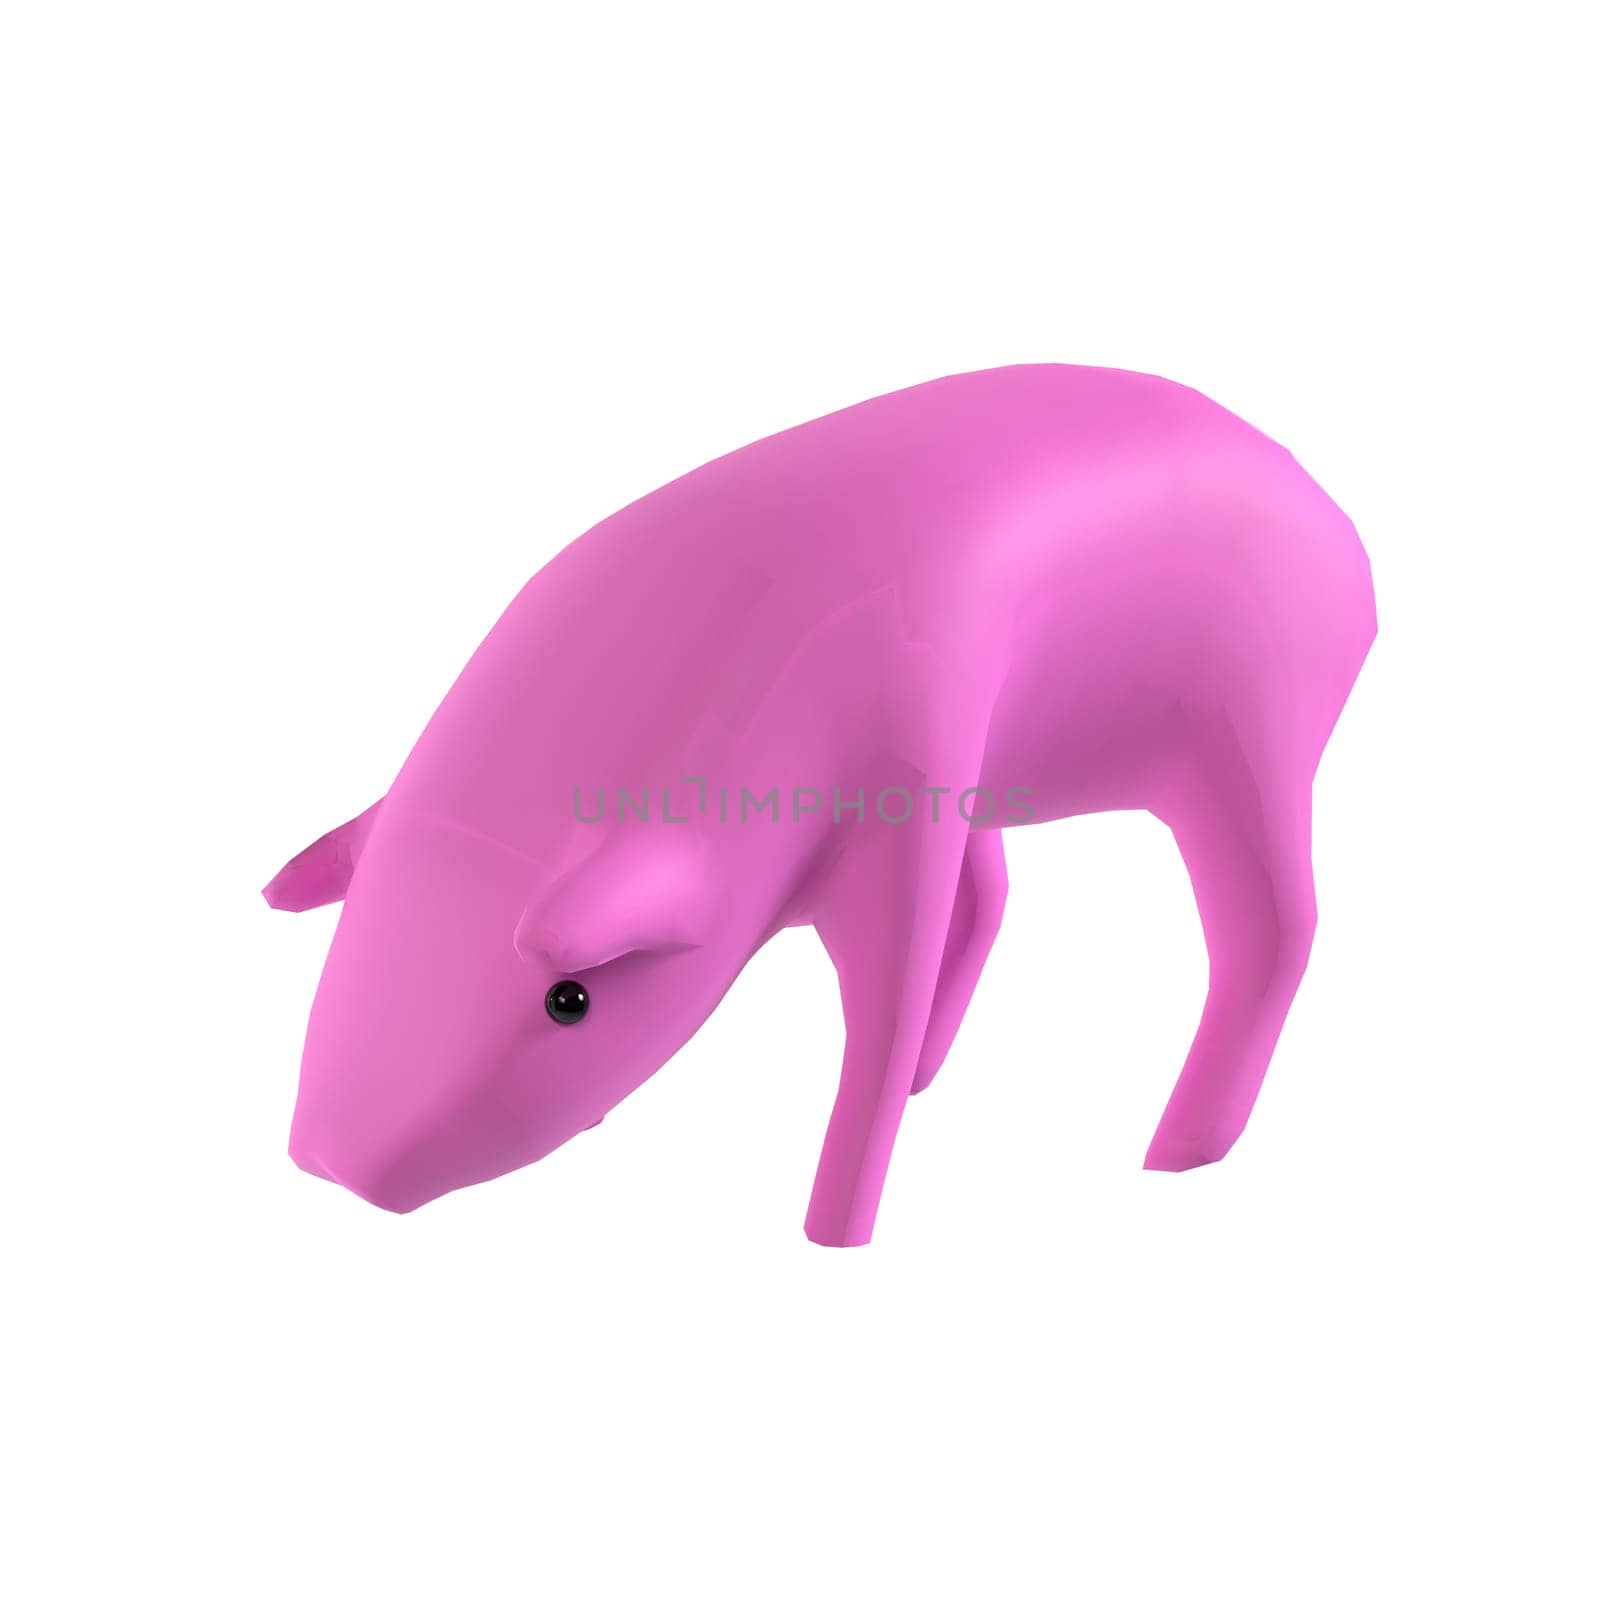 Pink Pig isolated on white background. High quality 3d illustration